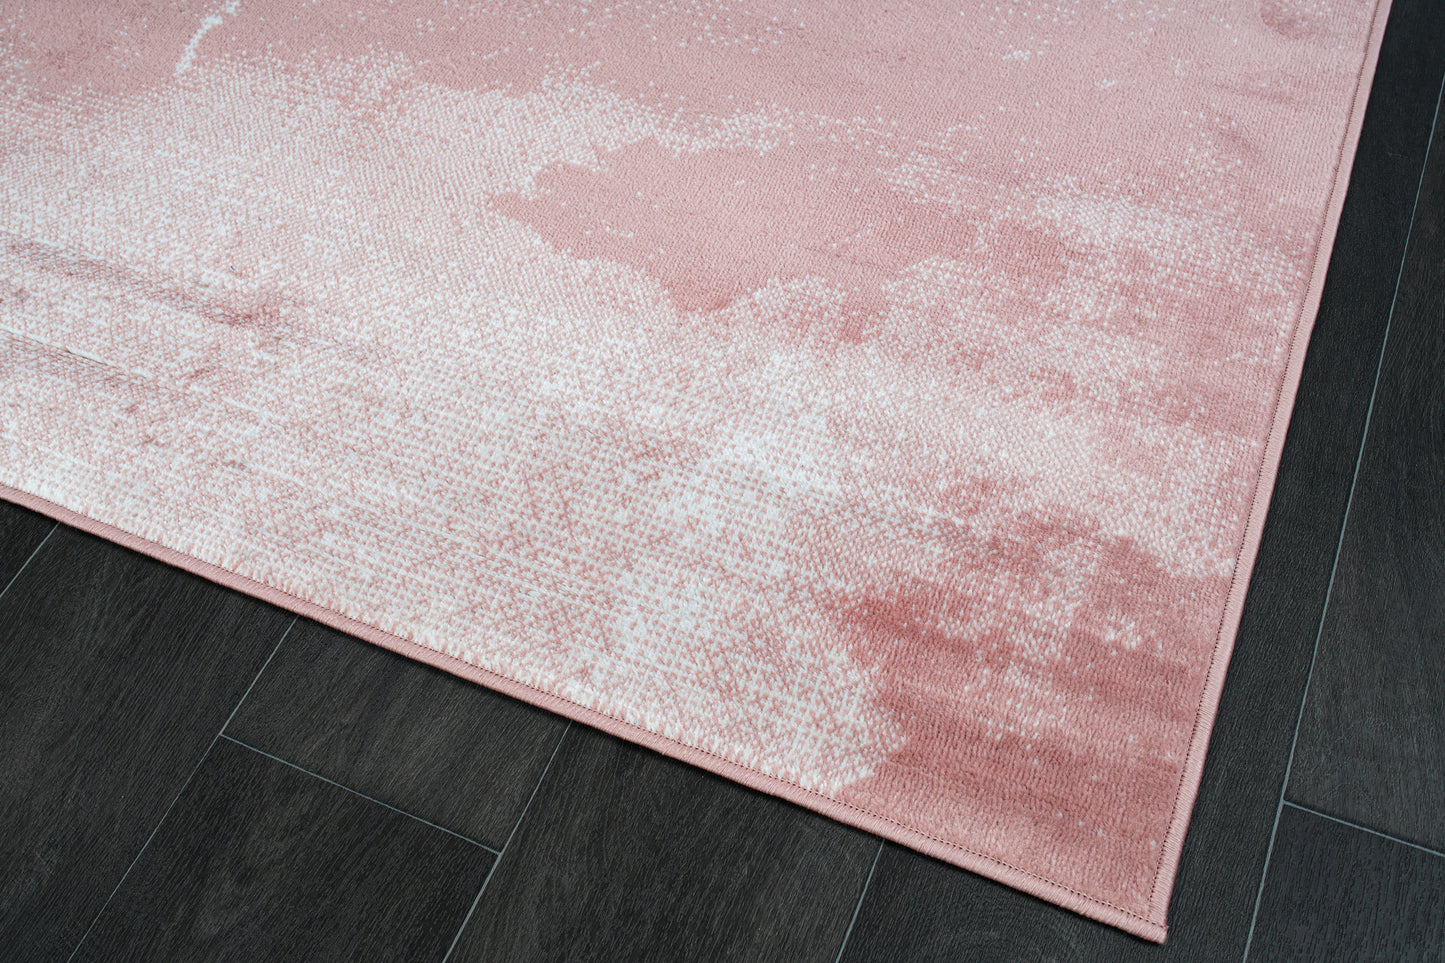 pink abstract rustic modern marble pattern area rug 5x7, 5x8 ft Contemporary, Living Room Carpet, Bedroom, Home Office